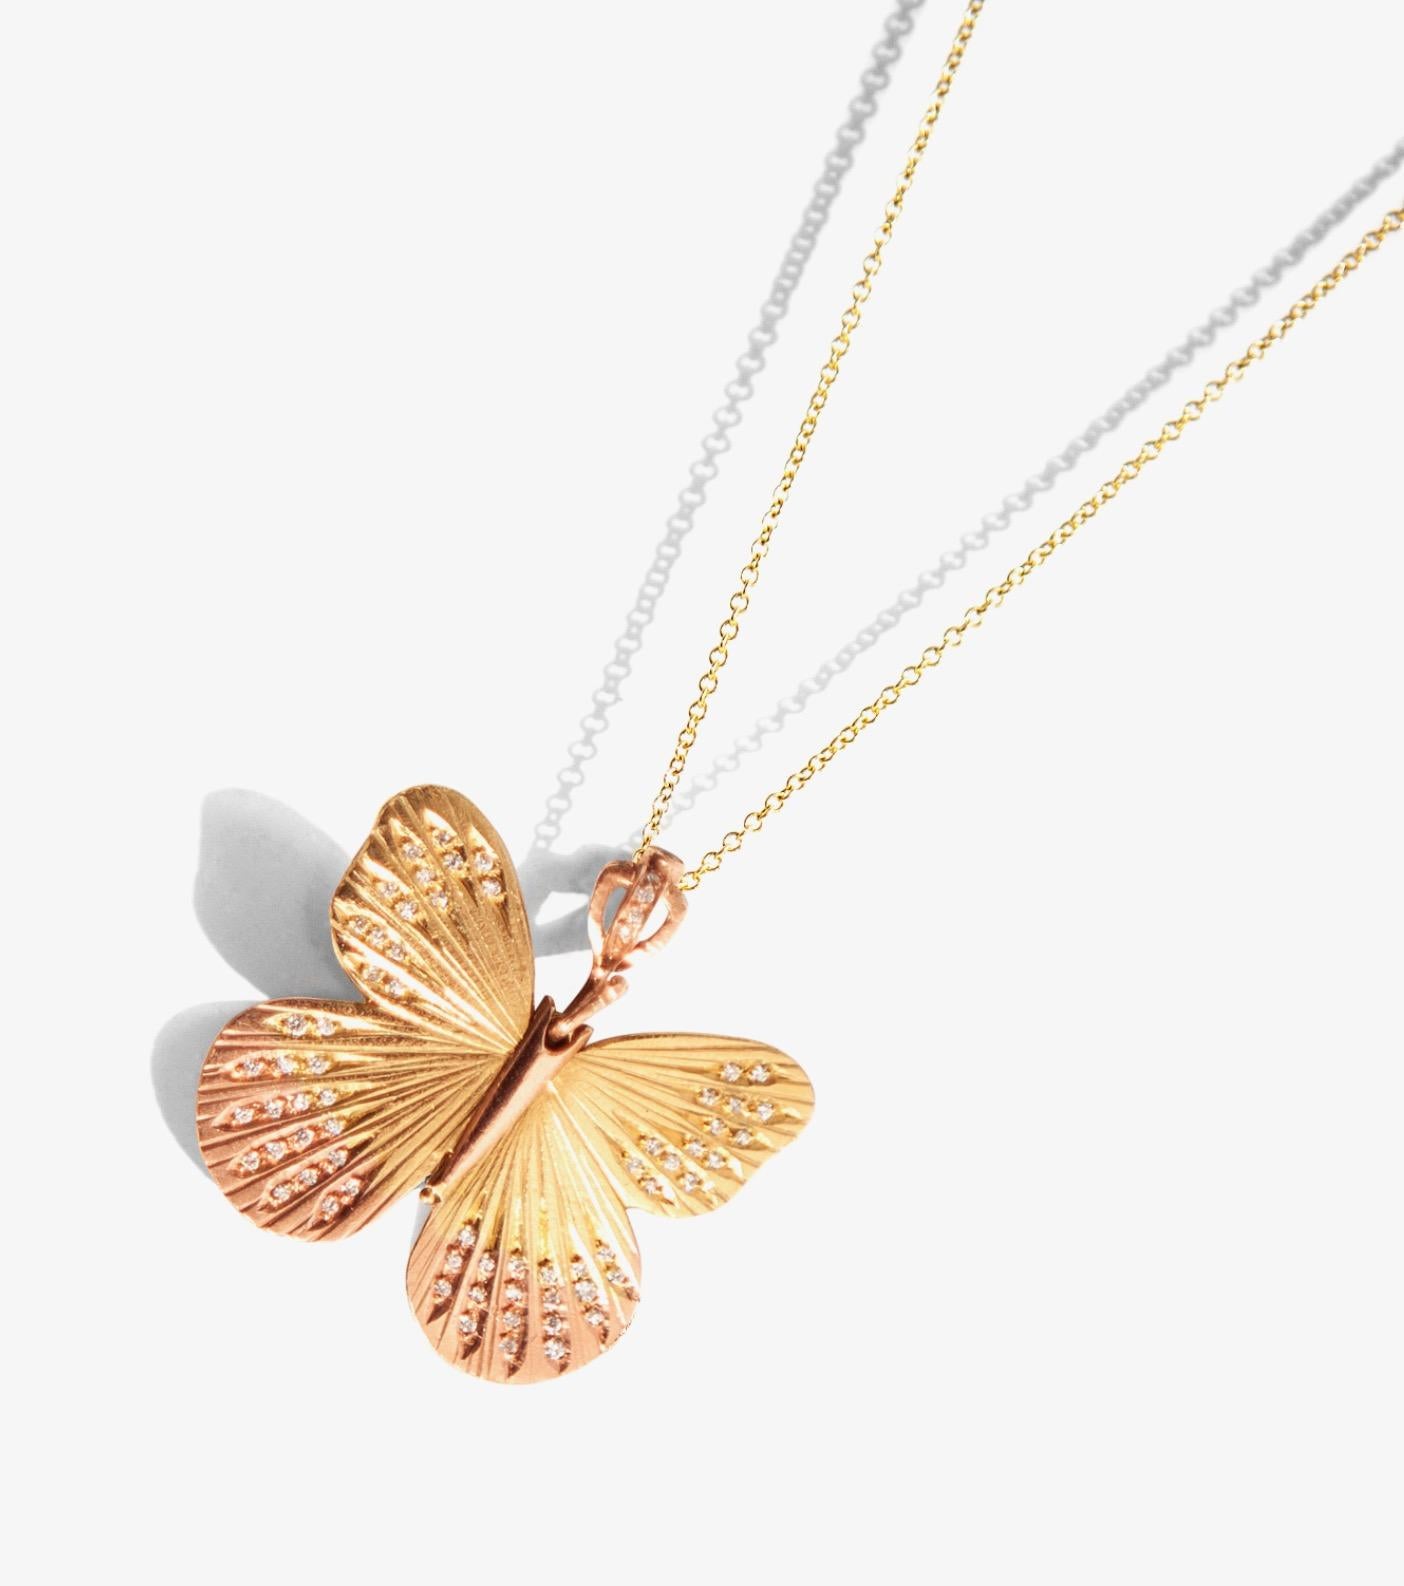 James Banks's signature butterfly necklace features a Large Asterope butterfly with a hinge at the center to allow movement of the wings, set in 18k Yellow Gold with 14k Rose Gold inlay and accents and pave white diamonds throughout and white